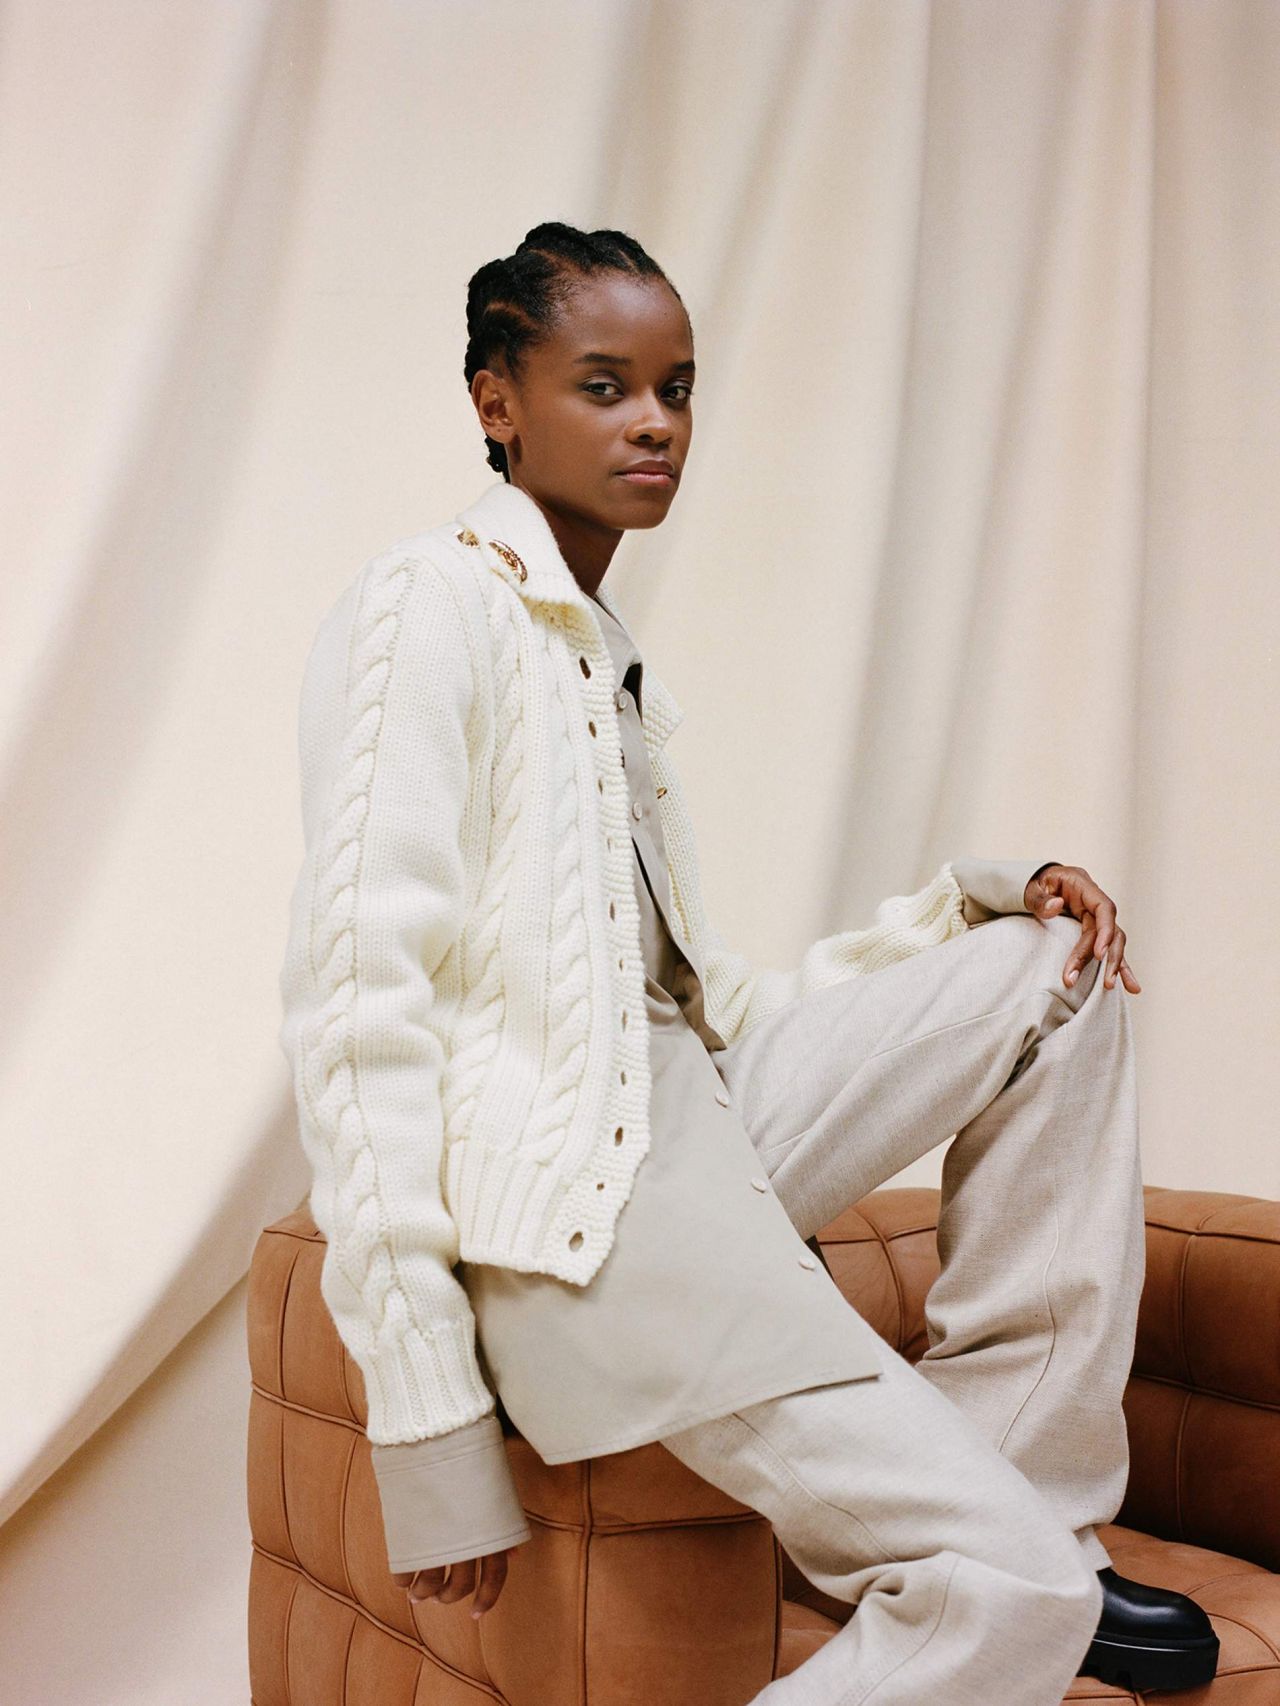 letitia-wright-the-edit-by-net-a-porter-october-2020-7.jpg